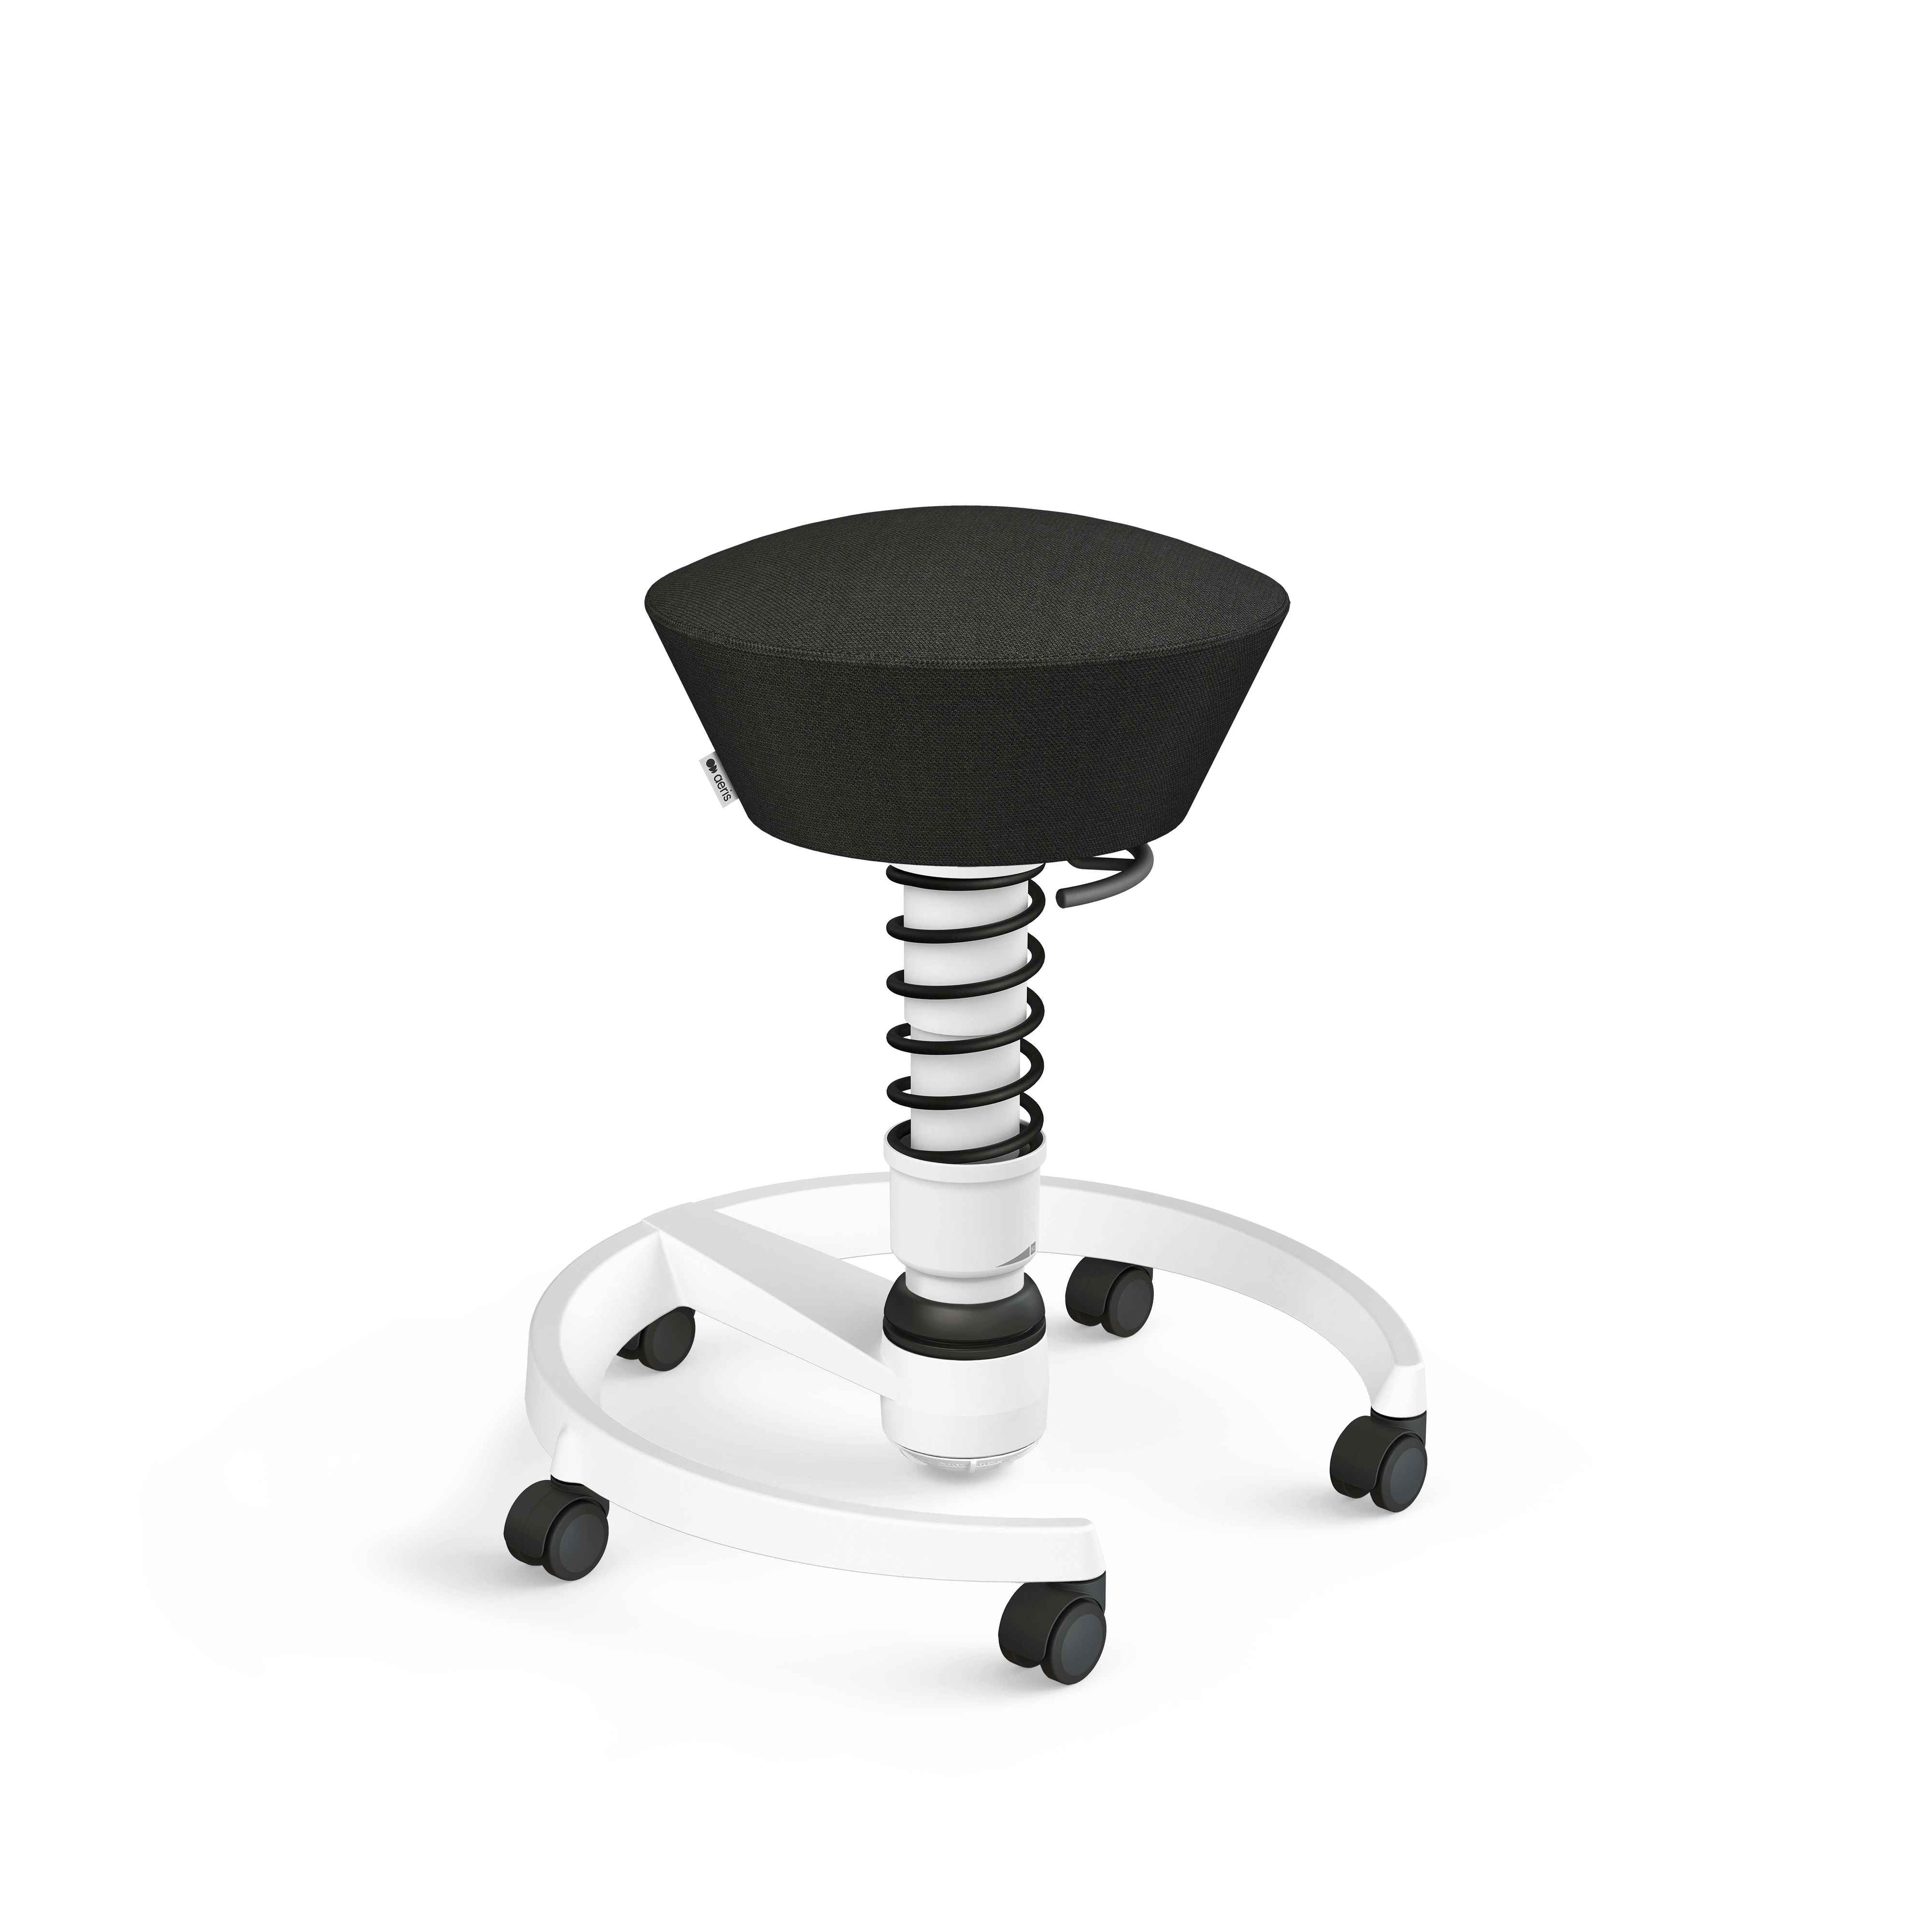 Aeris Swopper office stool with black seat and matching spring, white frame and castors.